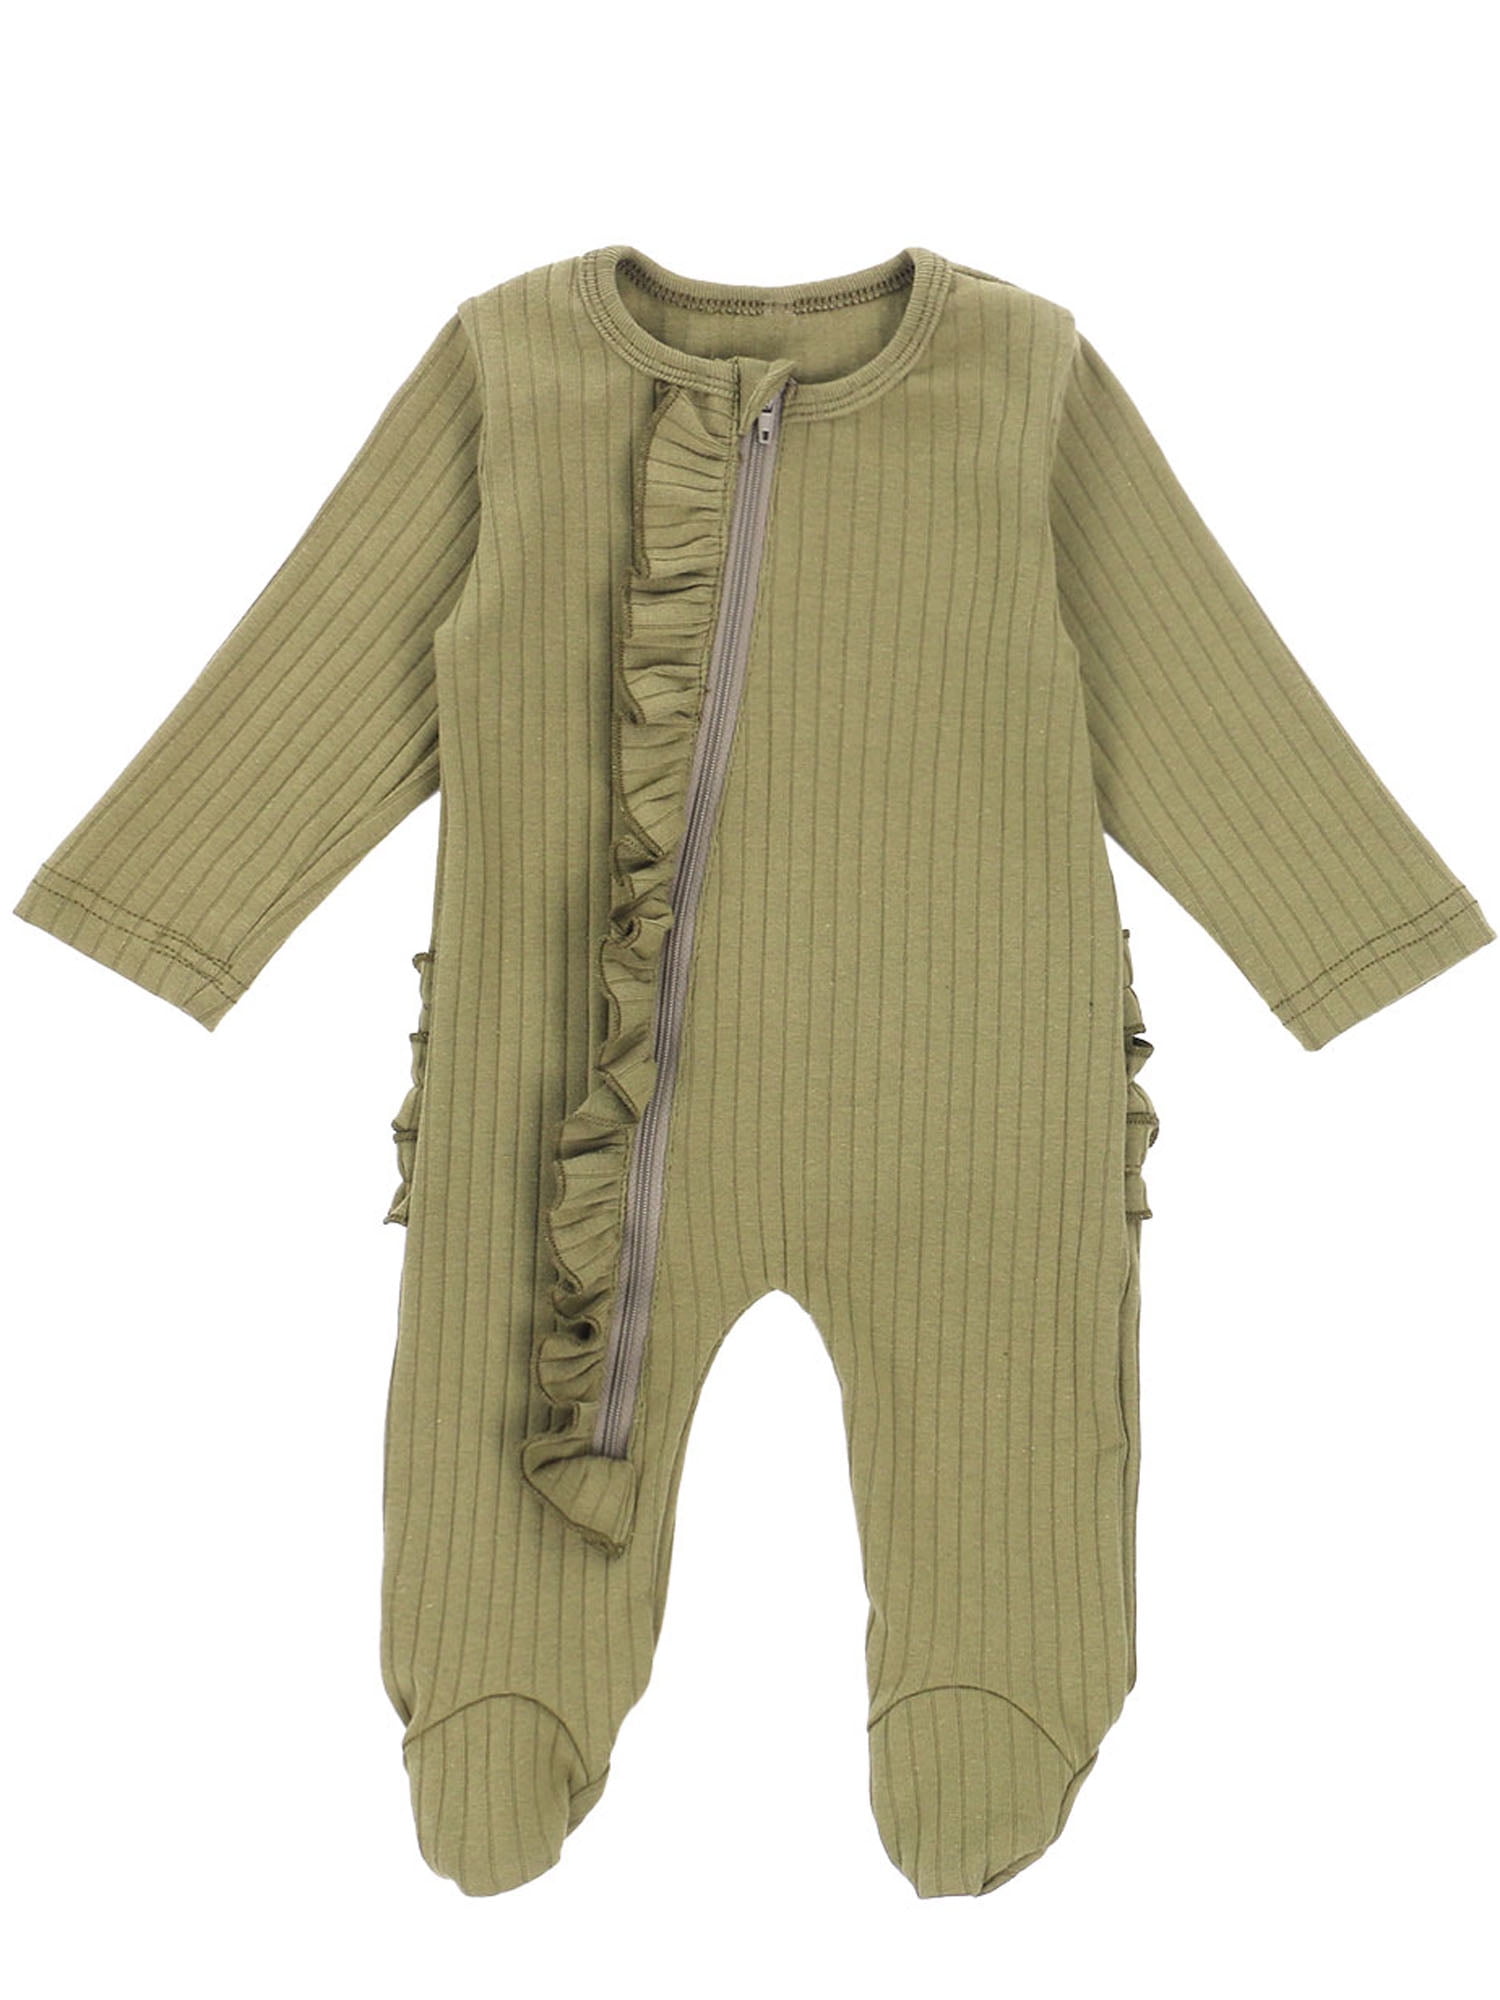 Jacket Overalls Clothing Unisex Kids Clothing Footies & Rompers New Born Baby Rompers Knitting Clothing Knit Baby Rompers 